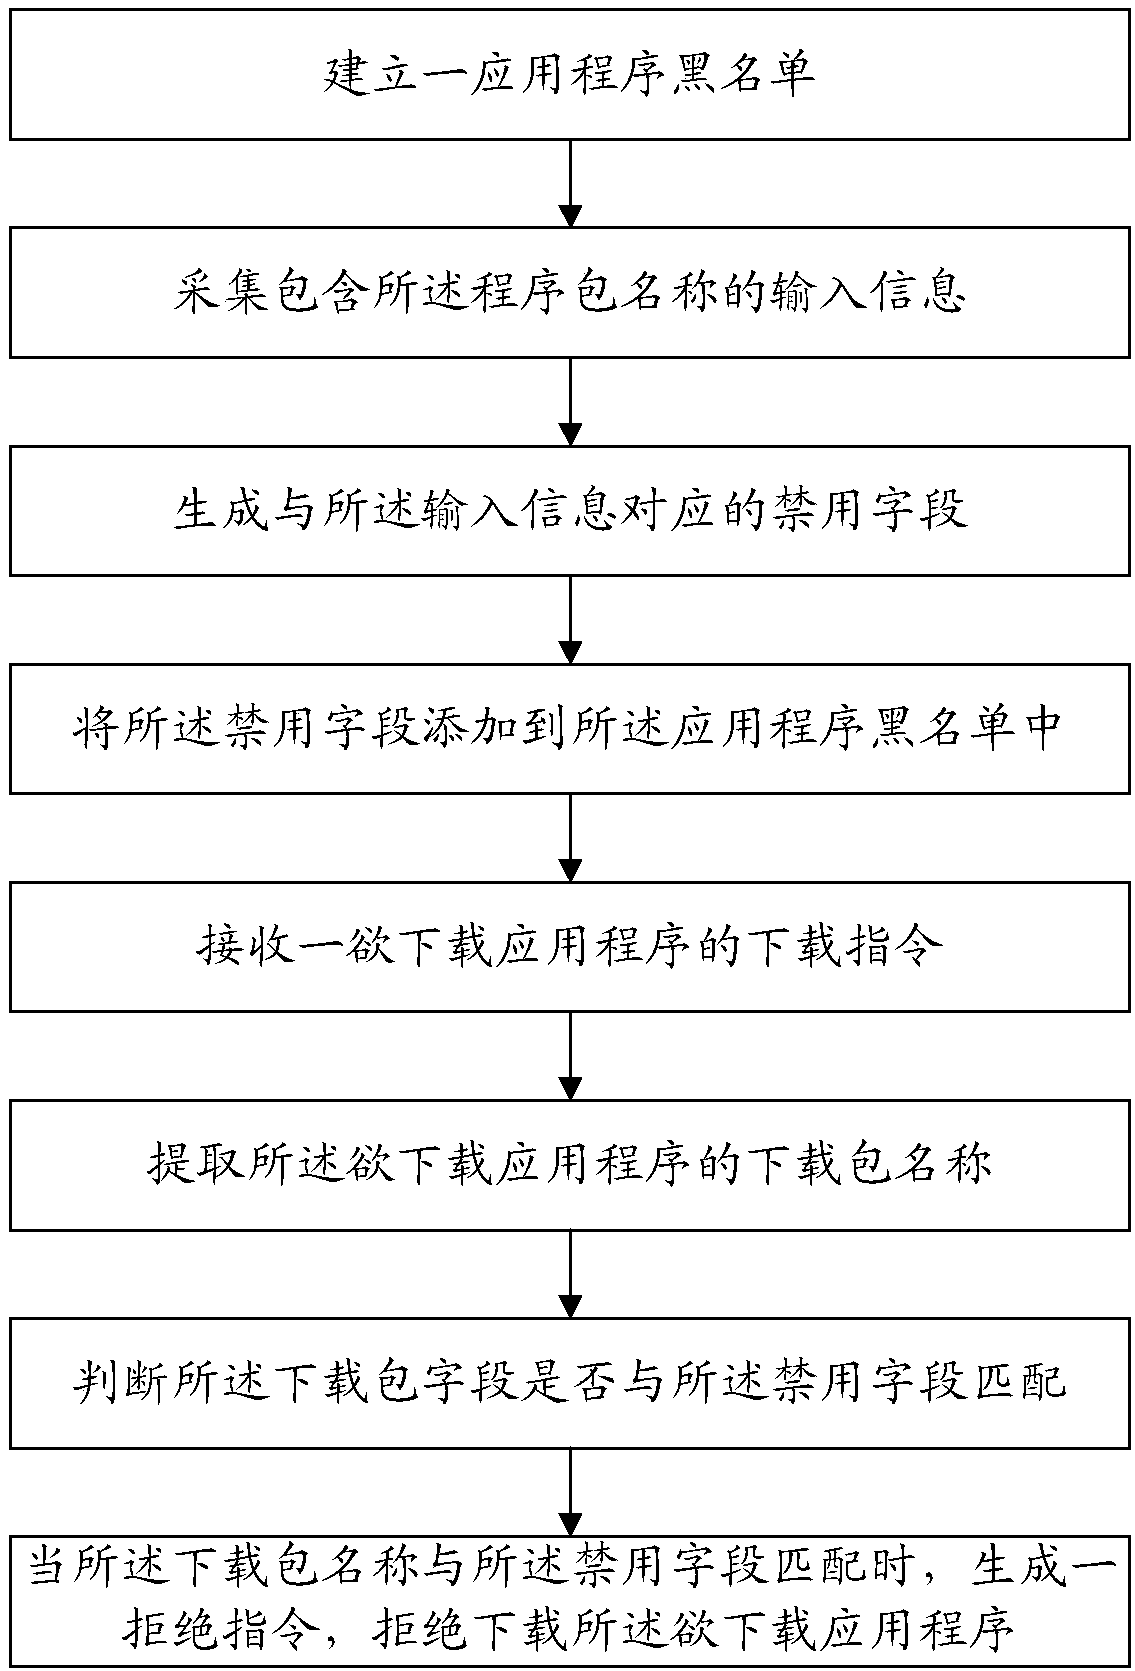 Application program monitoring method and system based on intelligent terminal